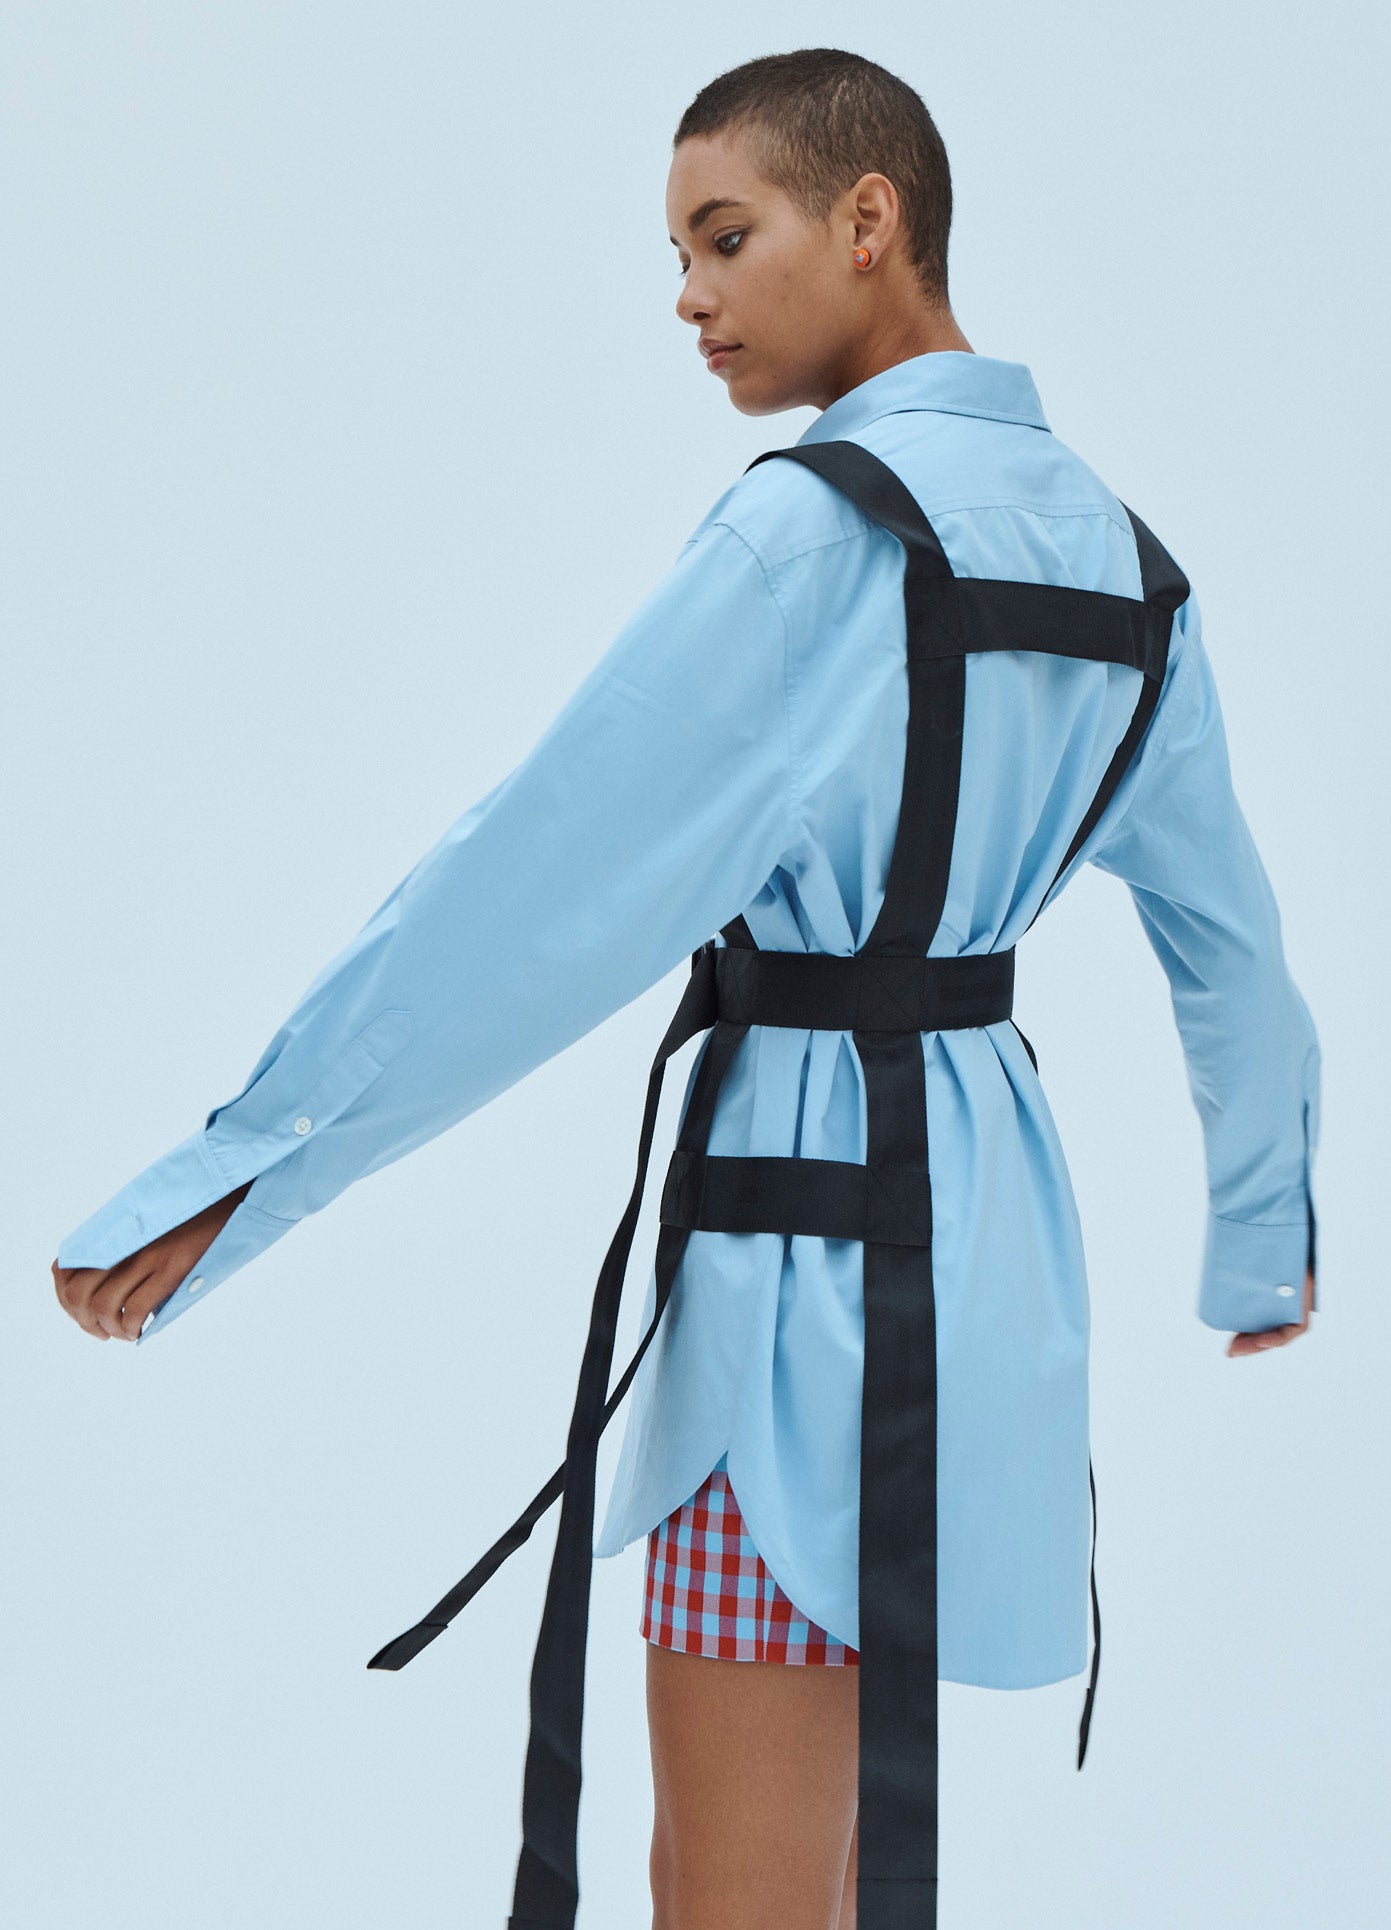 MONSE Strapped In Shirt Dress in Blue on Model Side View